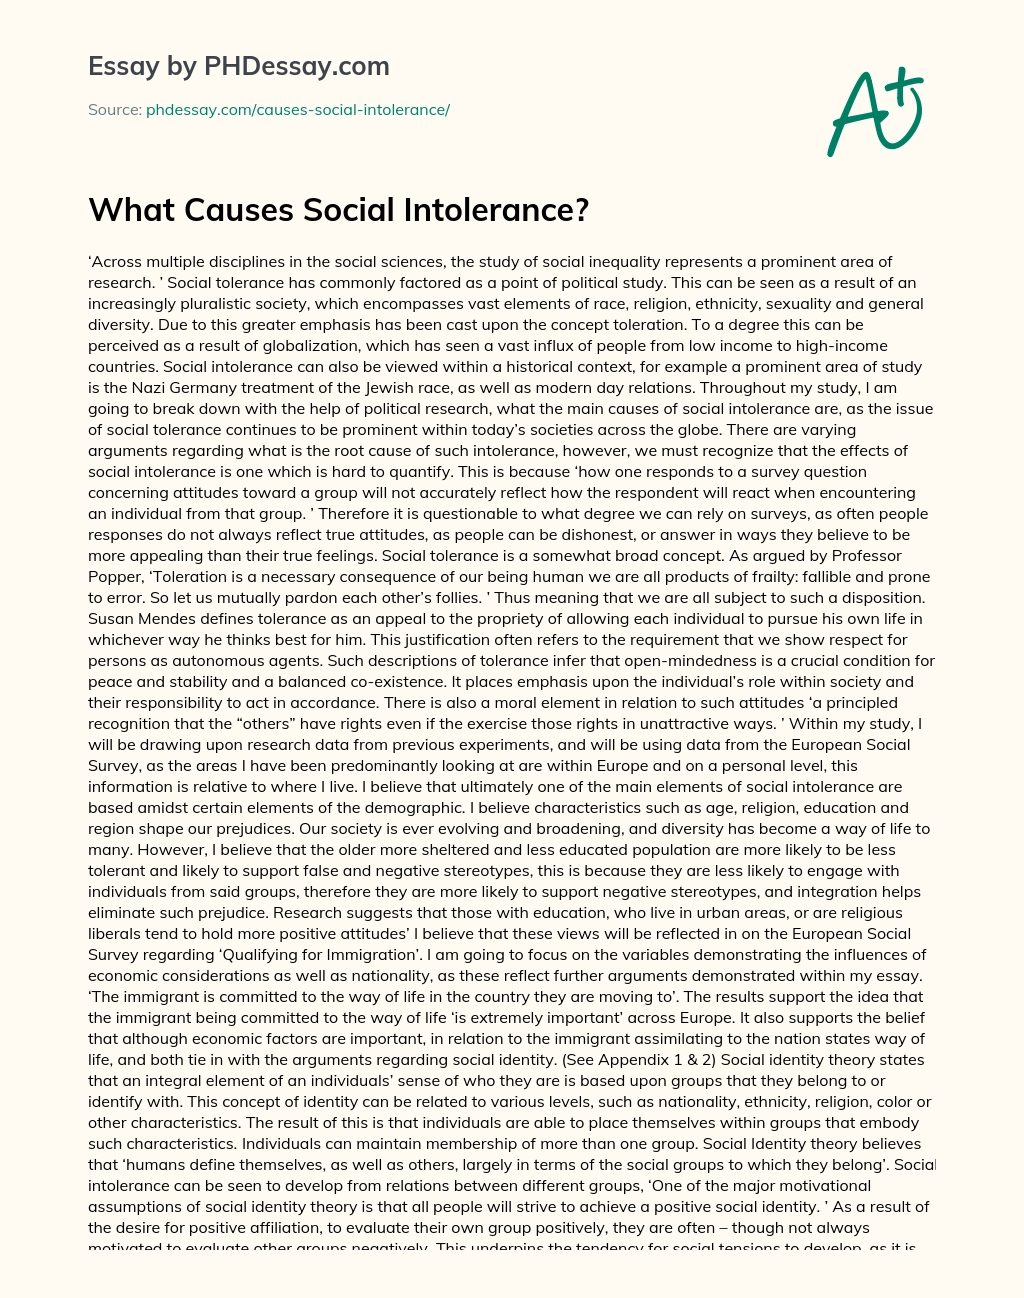 What Causes Social Intolerance? essay